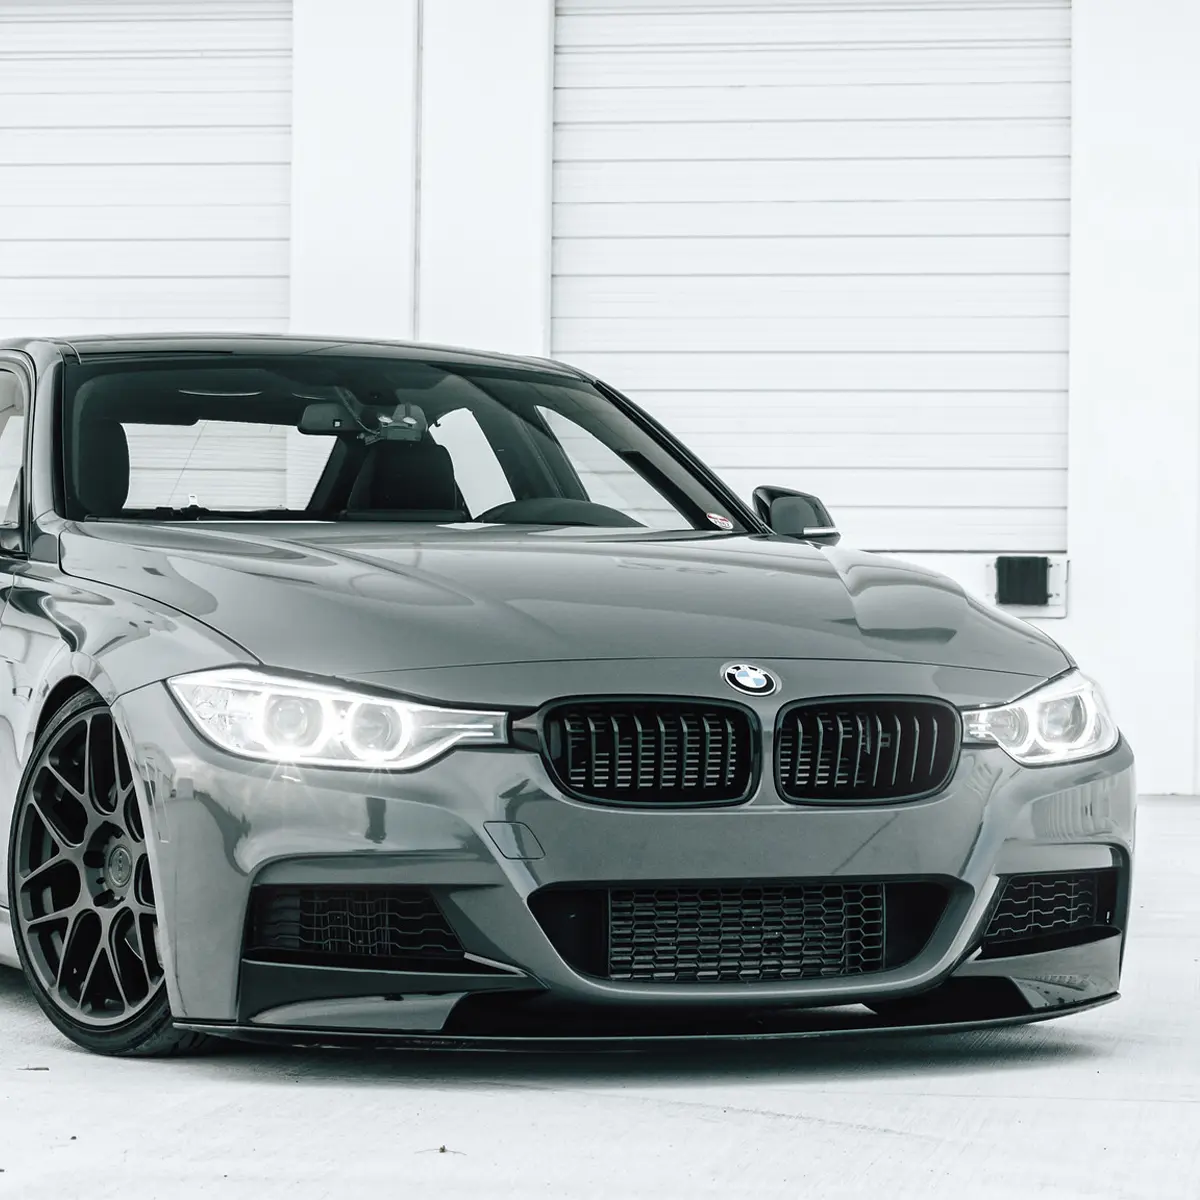 The Best Aftermarket Upgrades for Your BMW F30 3 Series